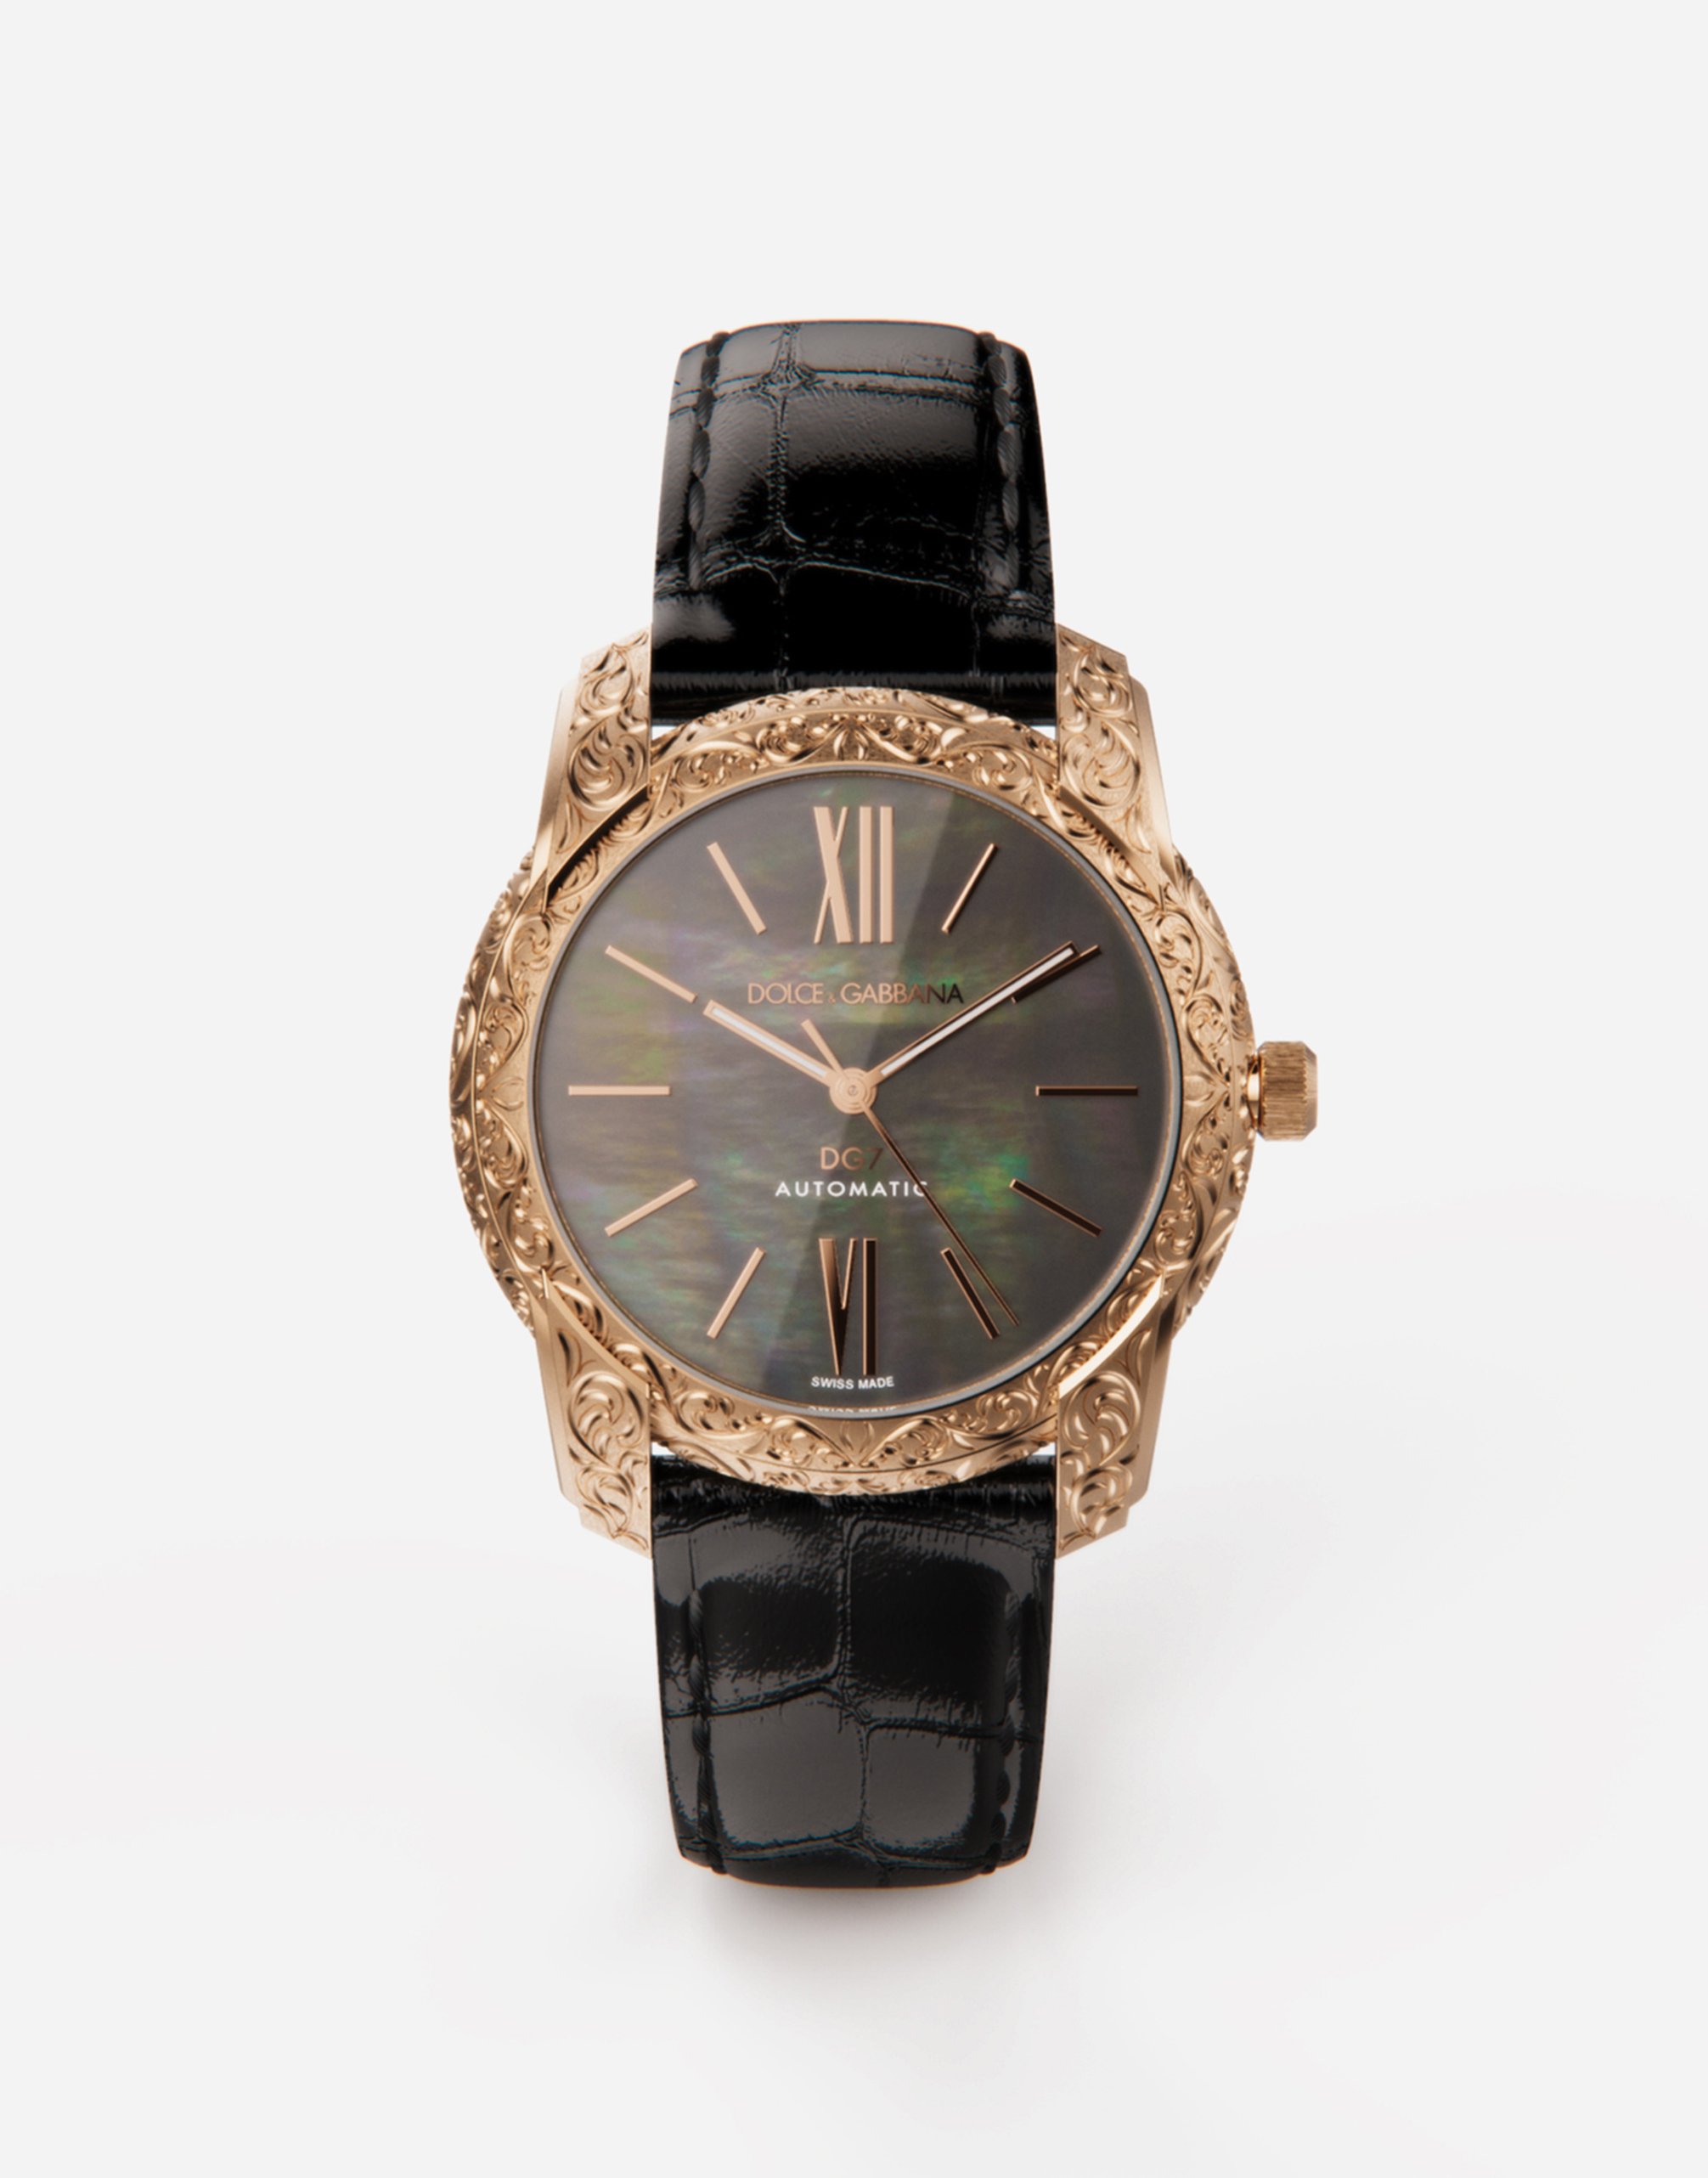 Gold and mother-of-pearl watch in Black